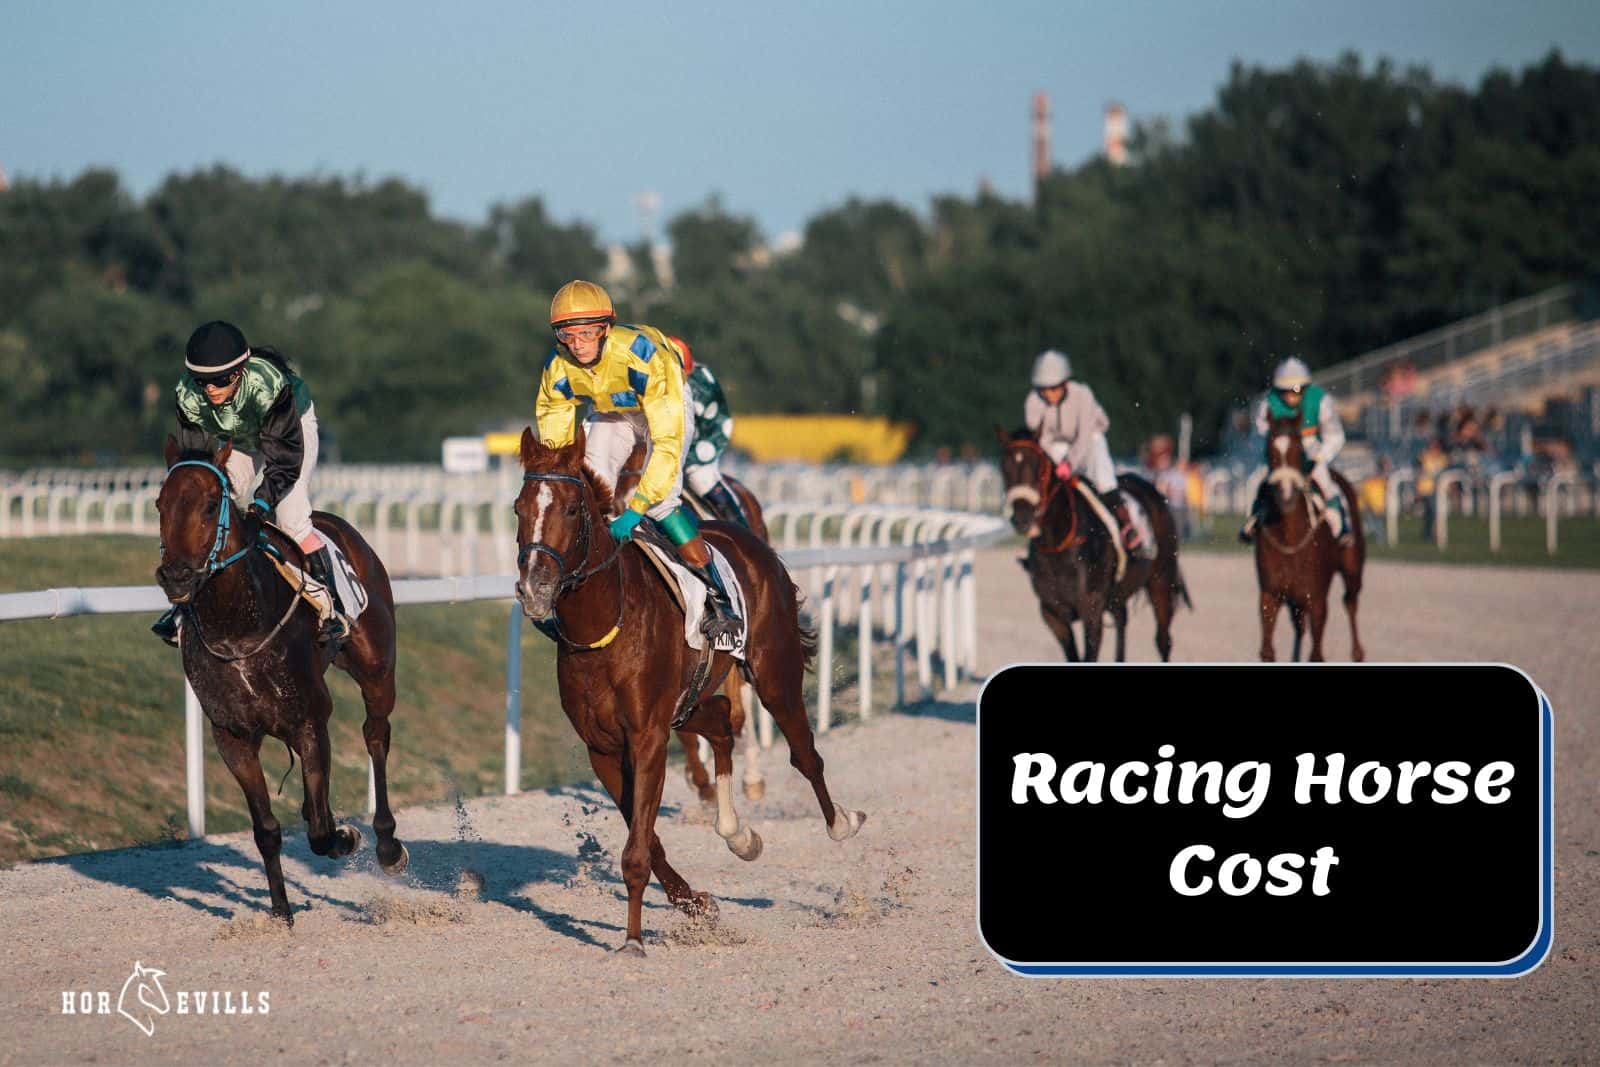 horse racing competition but How Much Does a Racing Horse Cost